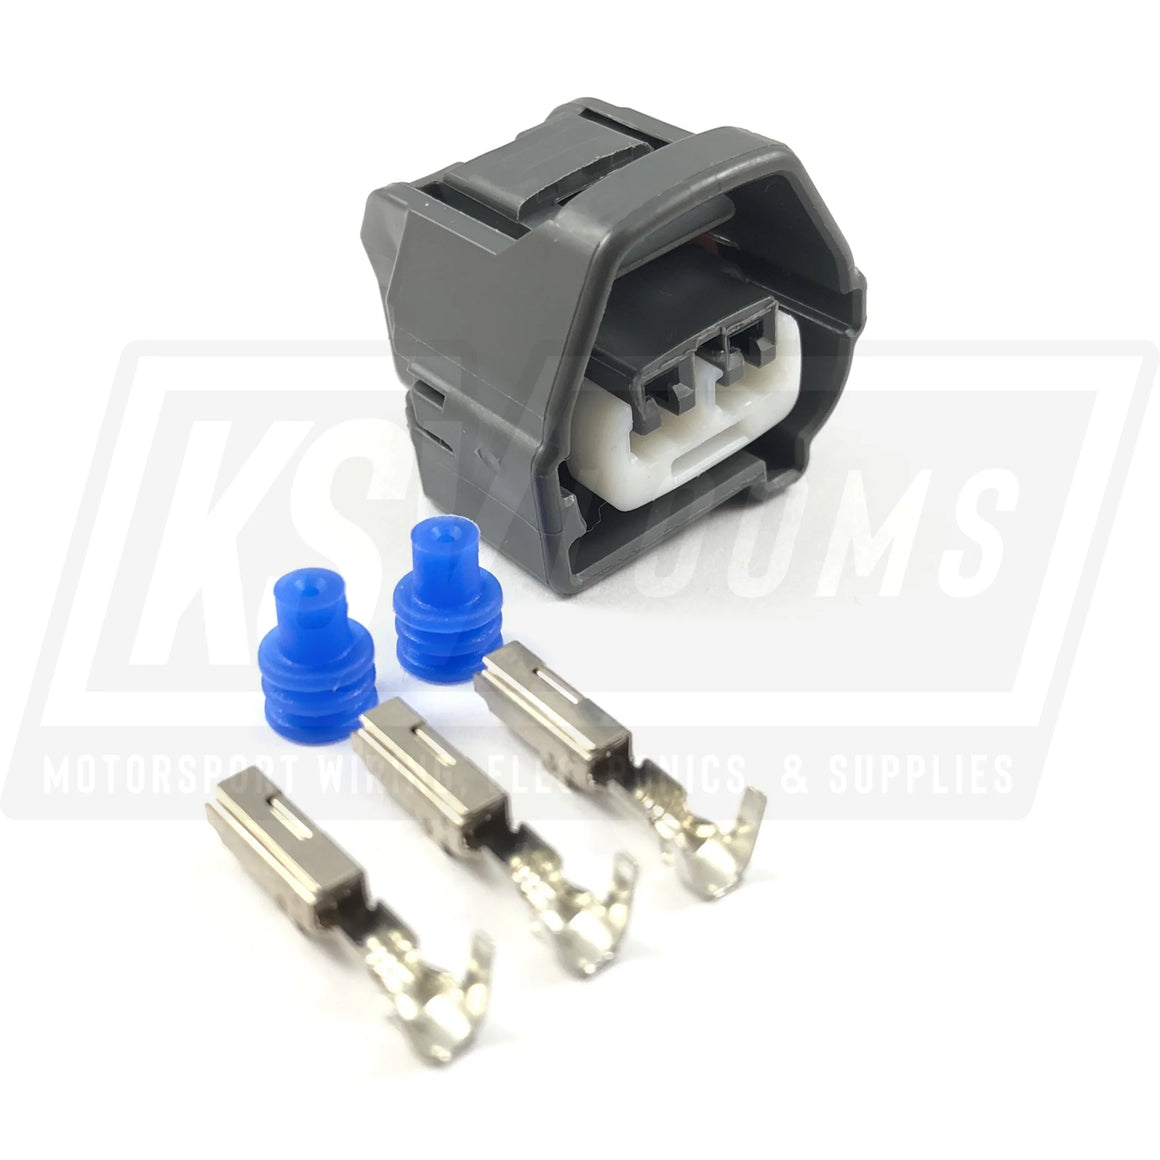 2-Way Connector Kit For Toyota Supra 2Jz-Gte 2-Pin Cam Angle Position Sensor (22-20 Awg)